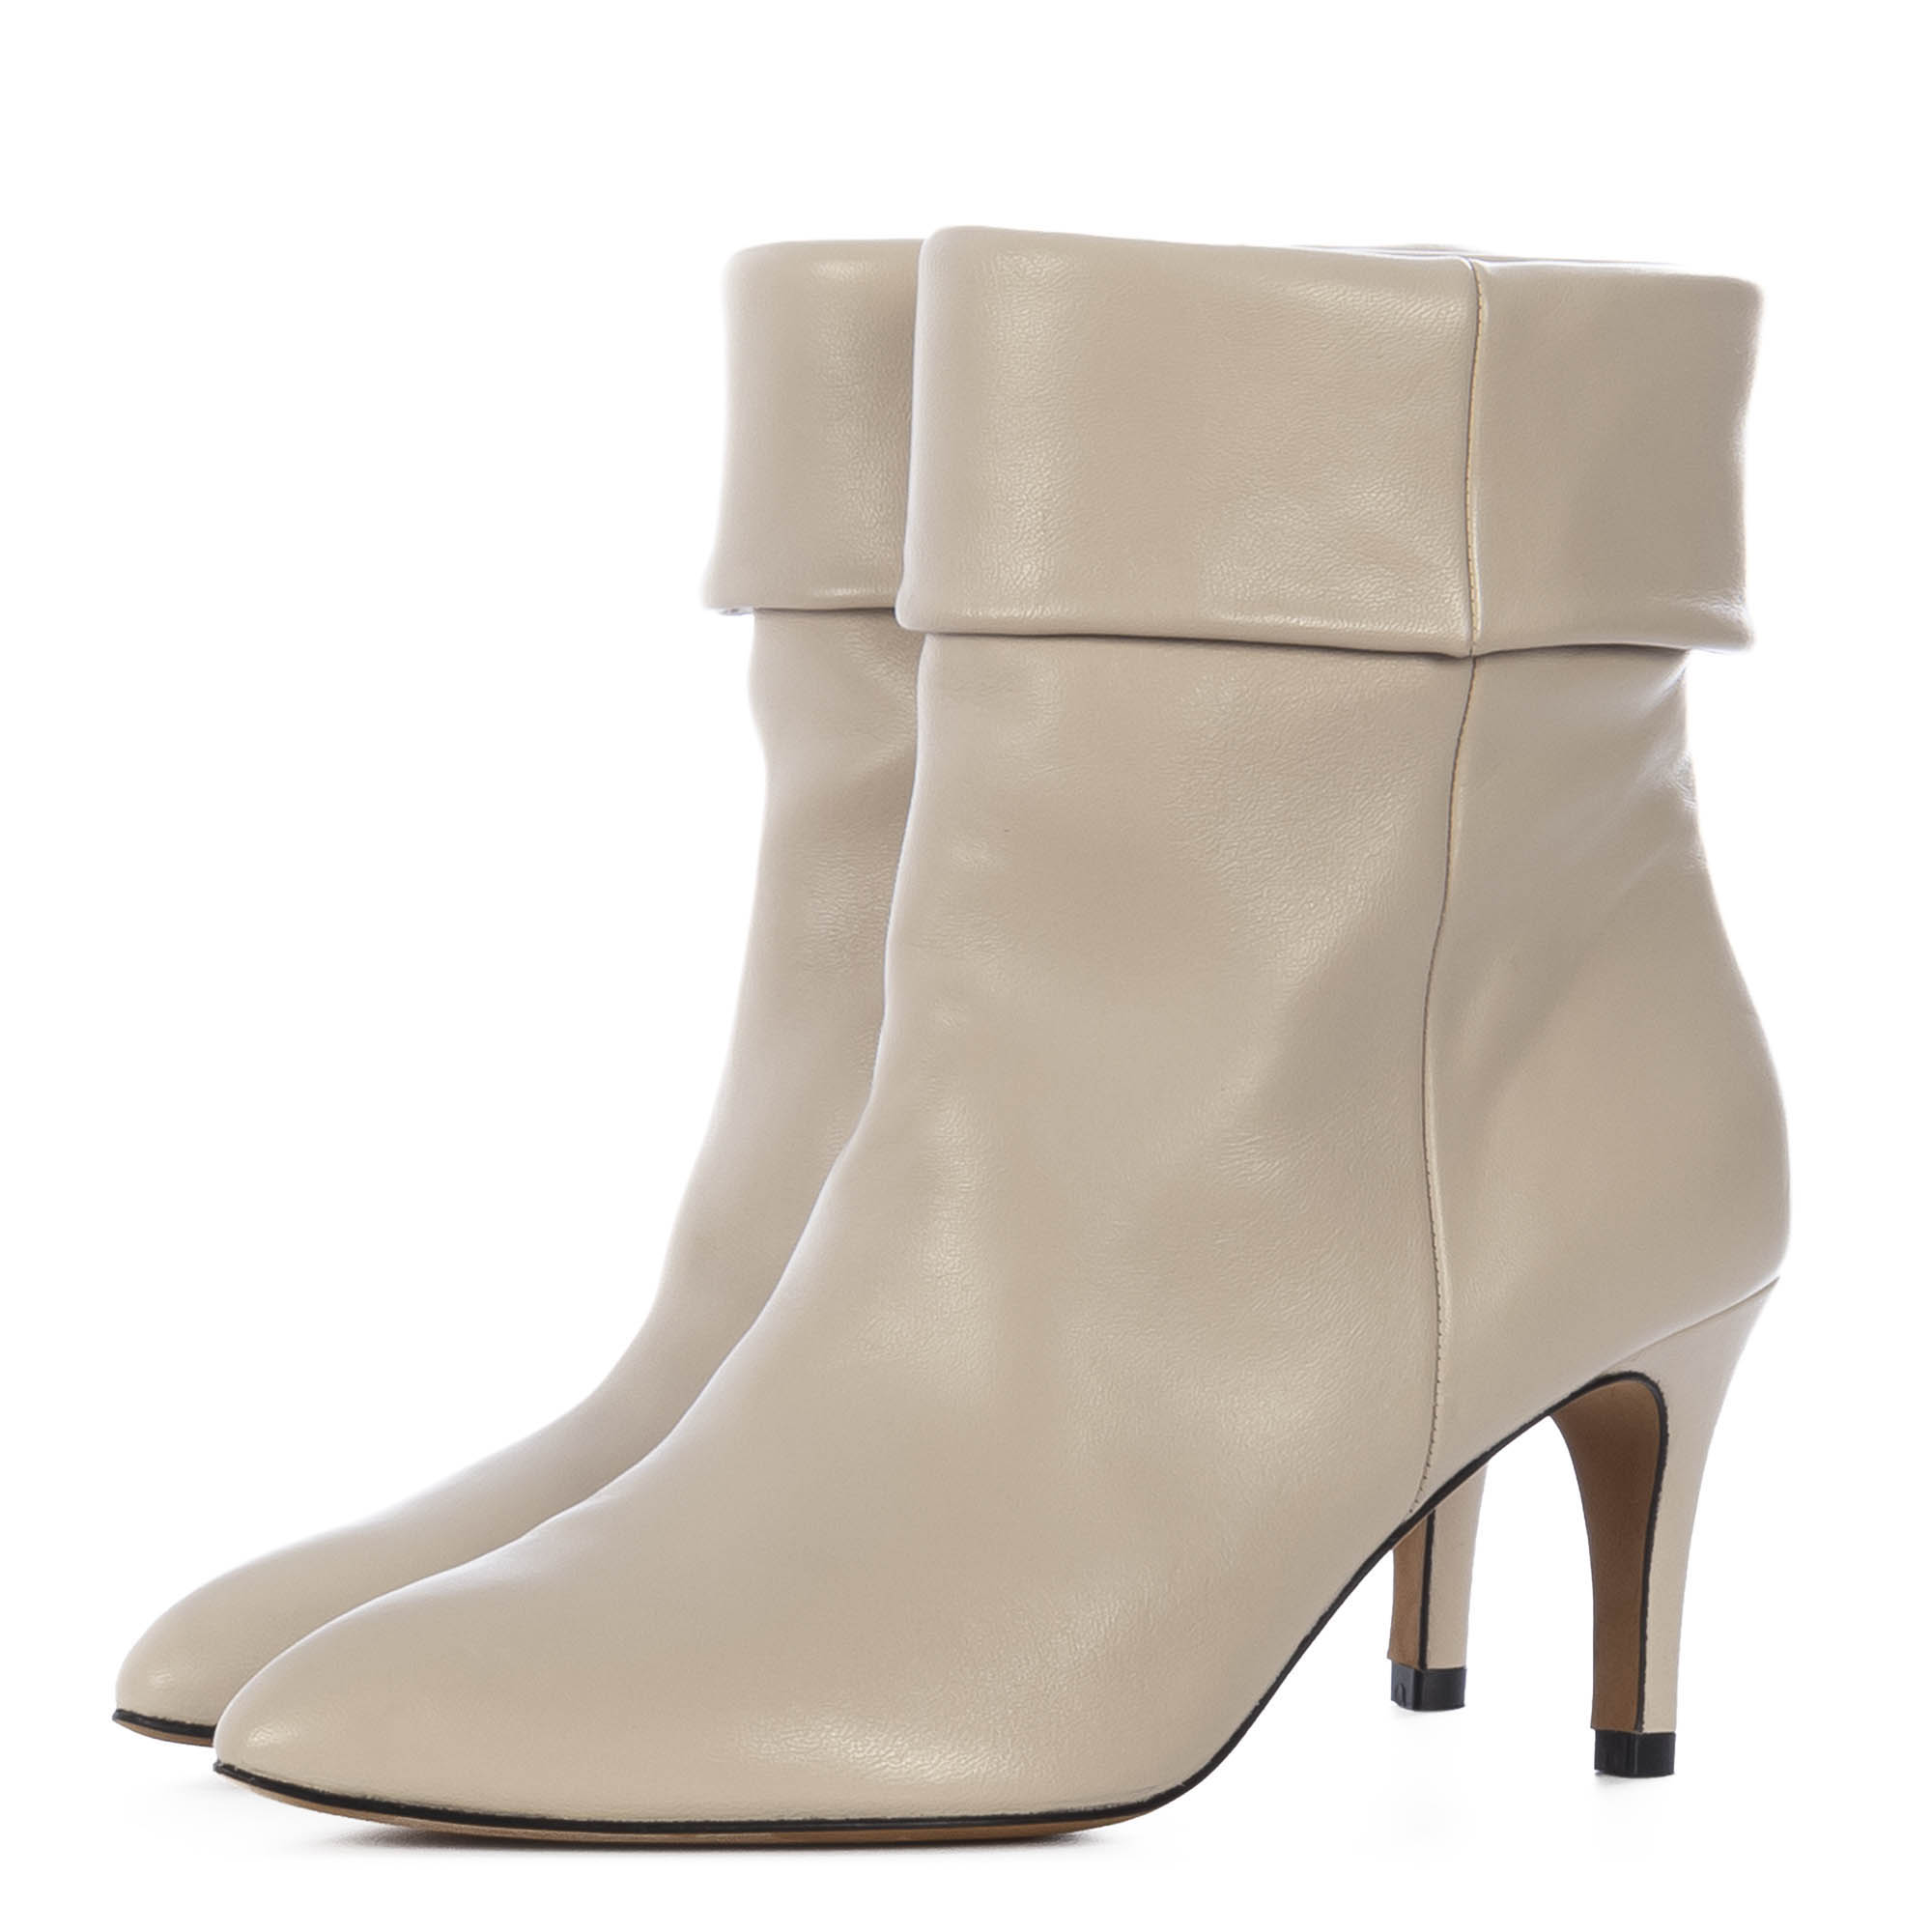 Bebo Mollie heeled ankle boots in beige | ASOS